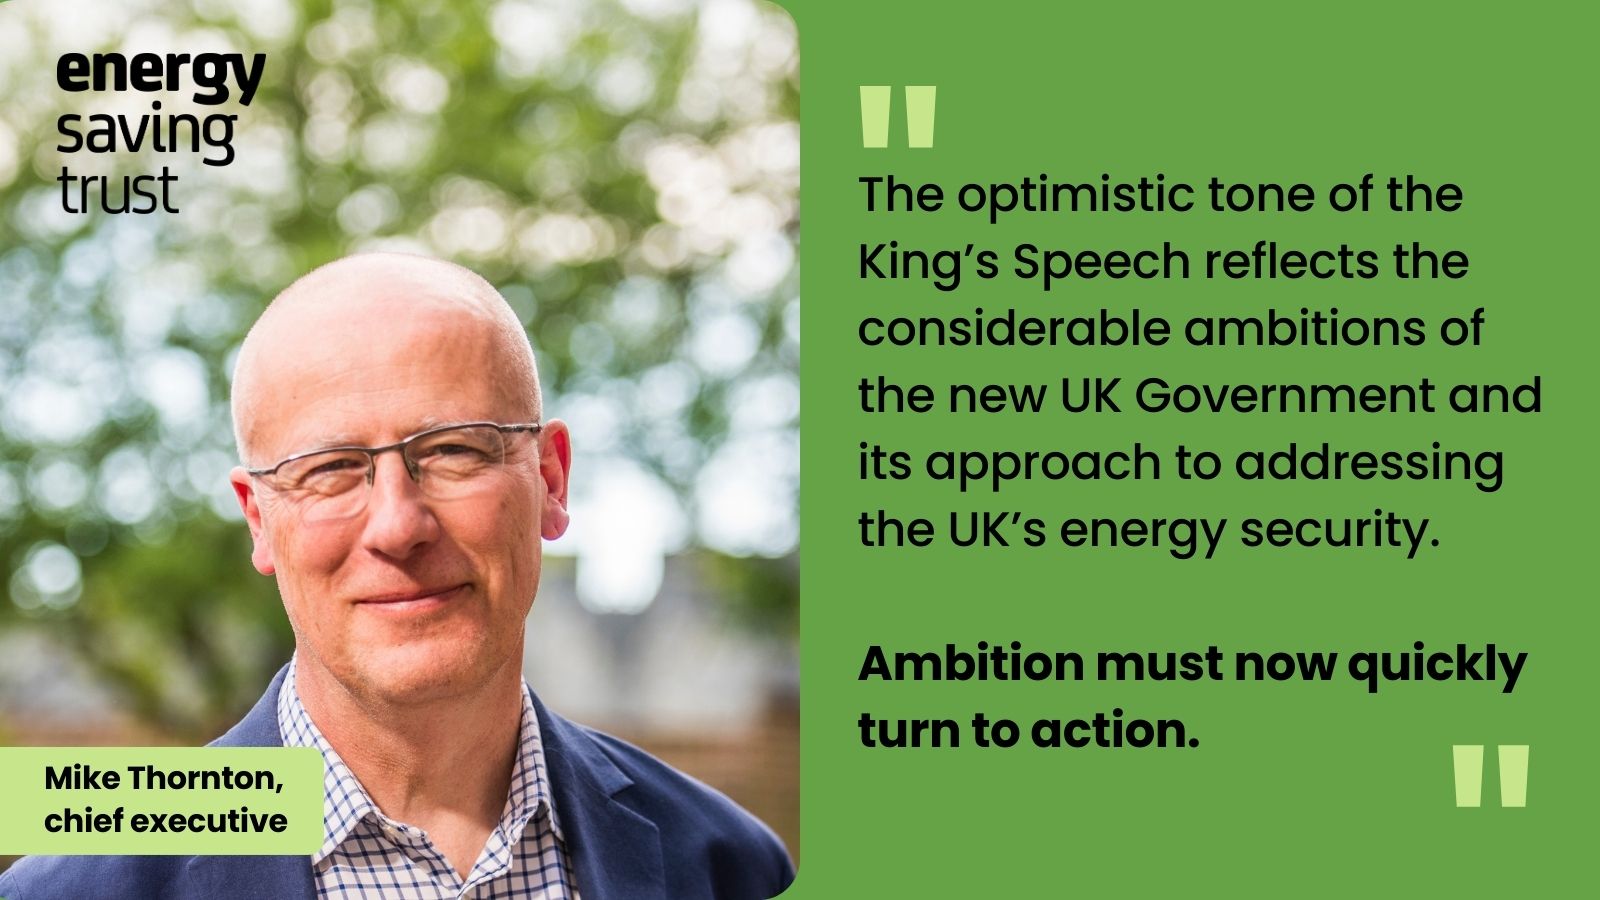 Energy Saving Trust chief executive Mike Thornton comments on the King